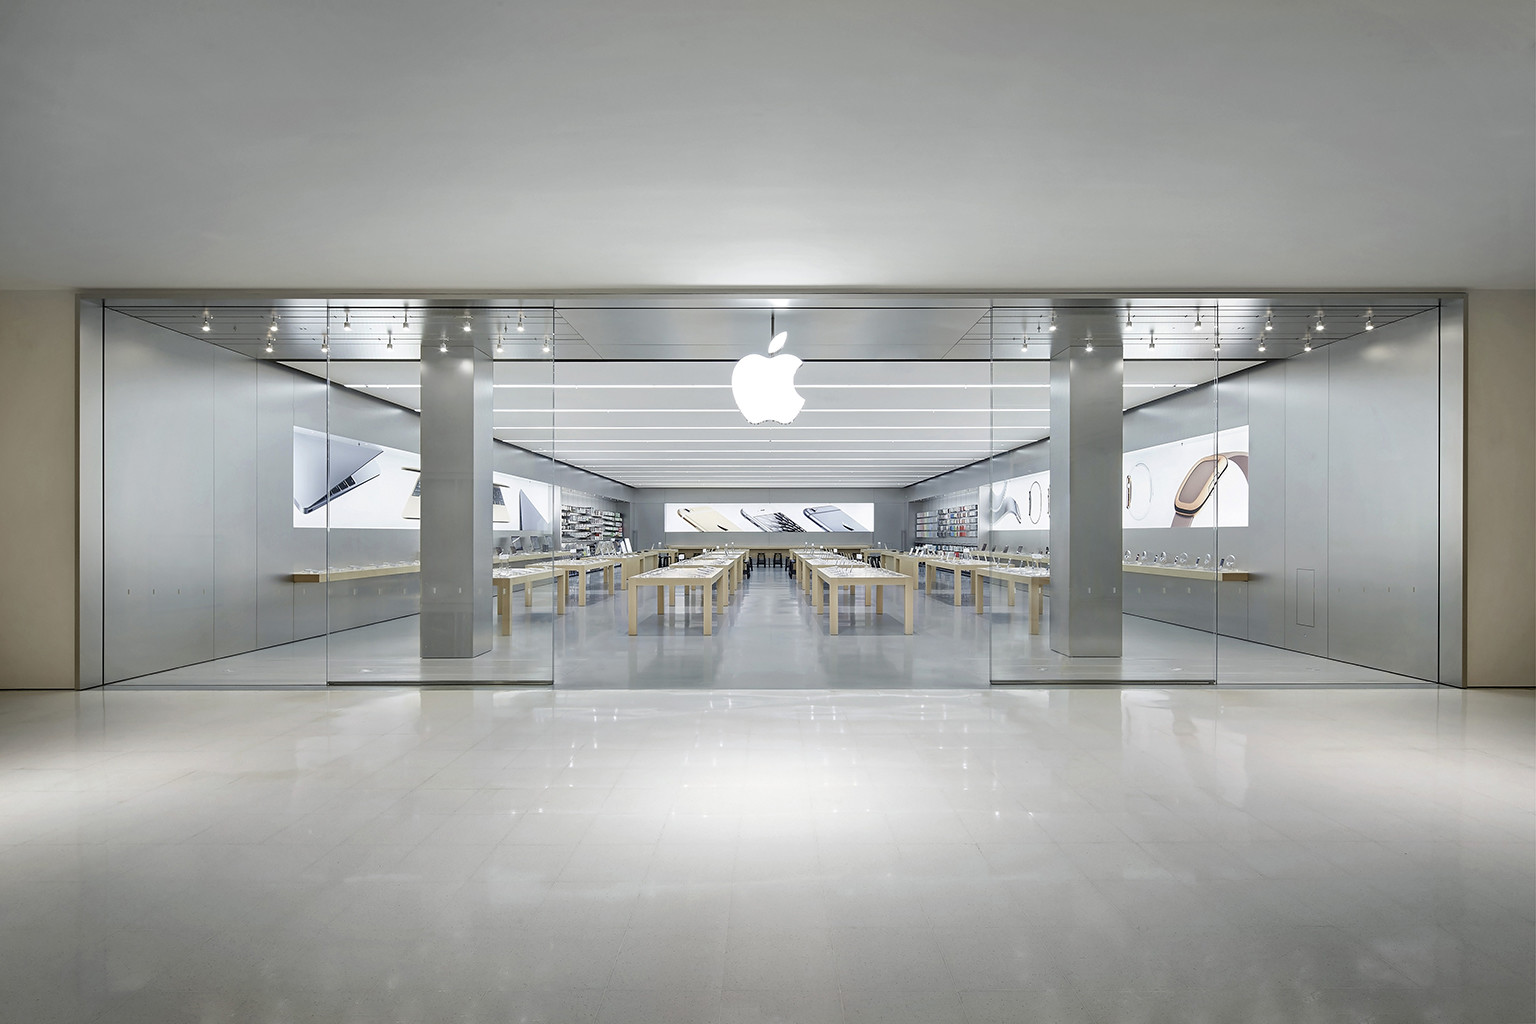 Rumor: Apple is planning two new stores for Brazil, including a "flagship" in São Paulo